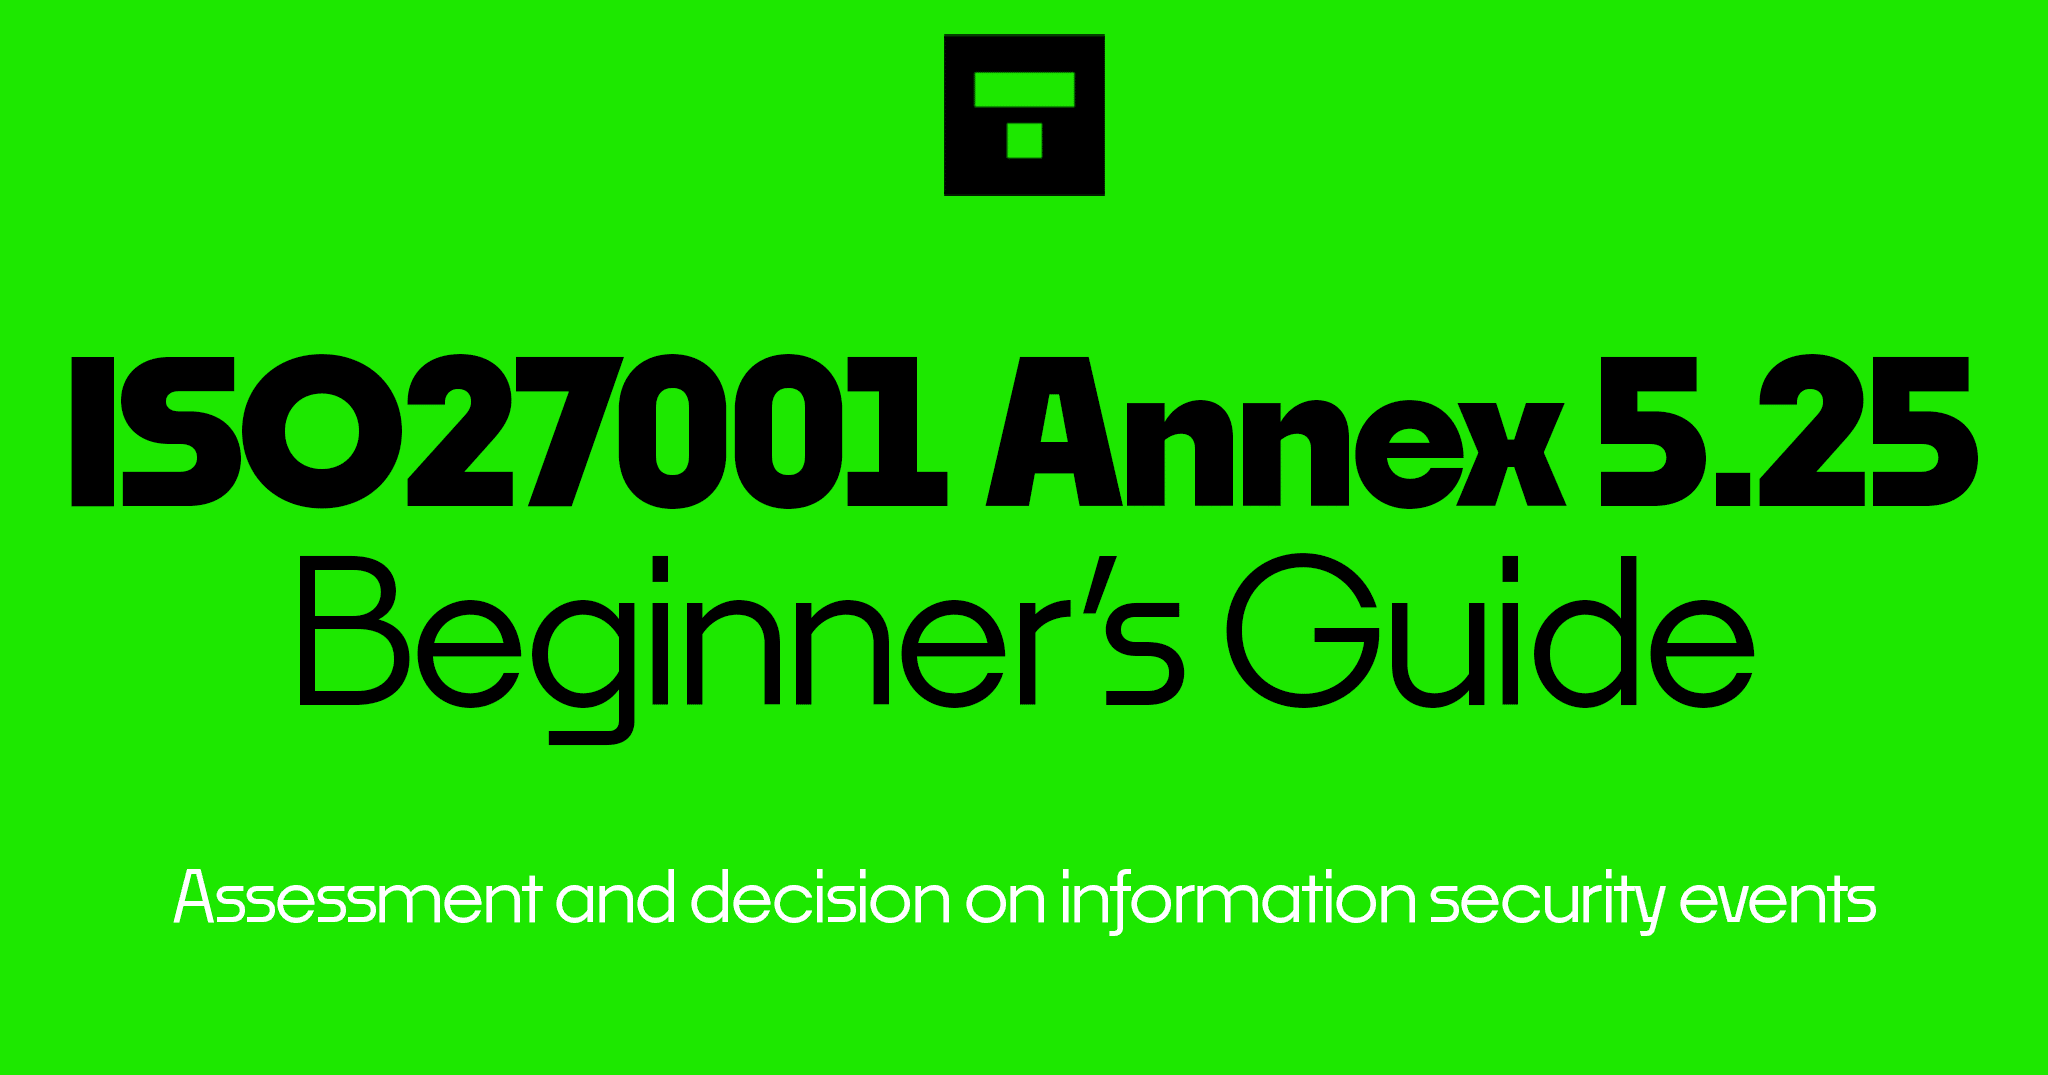 ISO 27001 Annex A 5.25 Assessment and decision on information security events Beginner's Guide